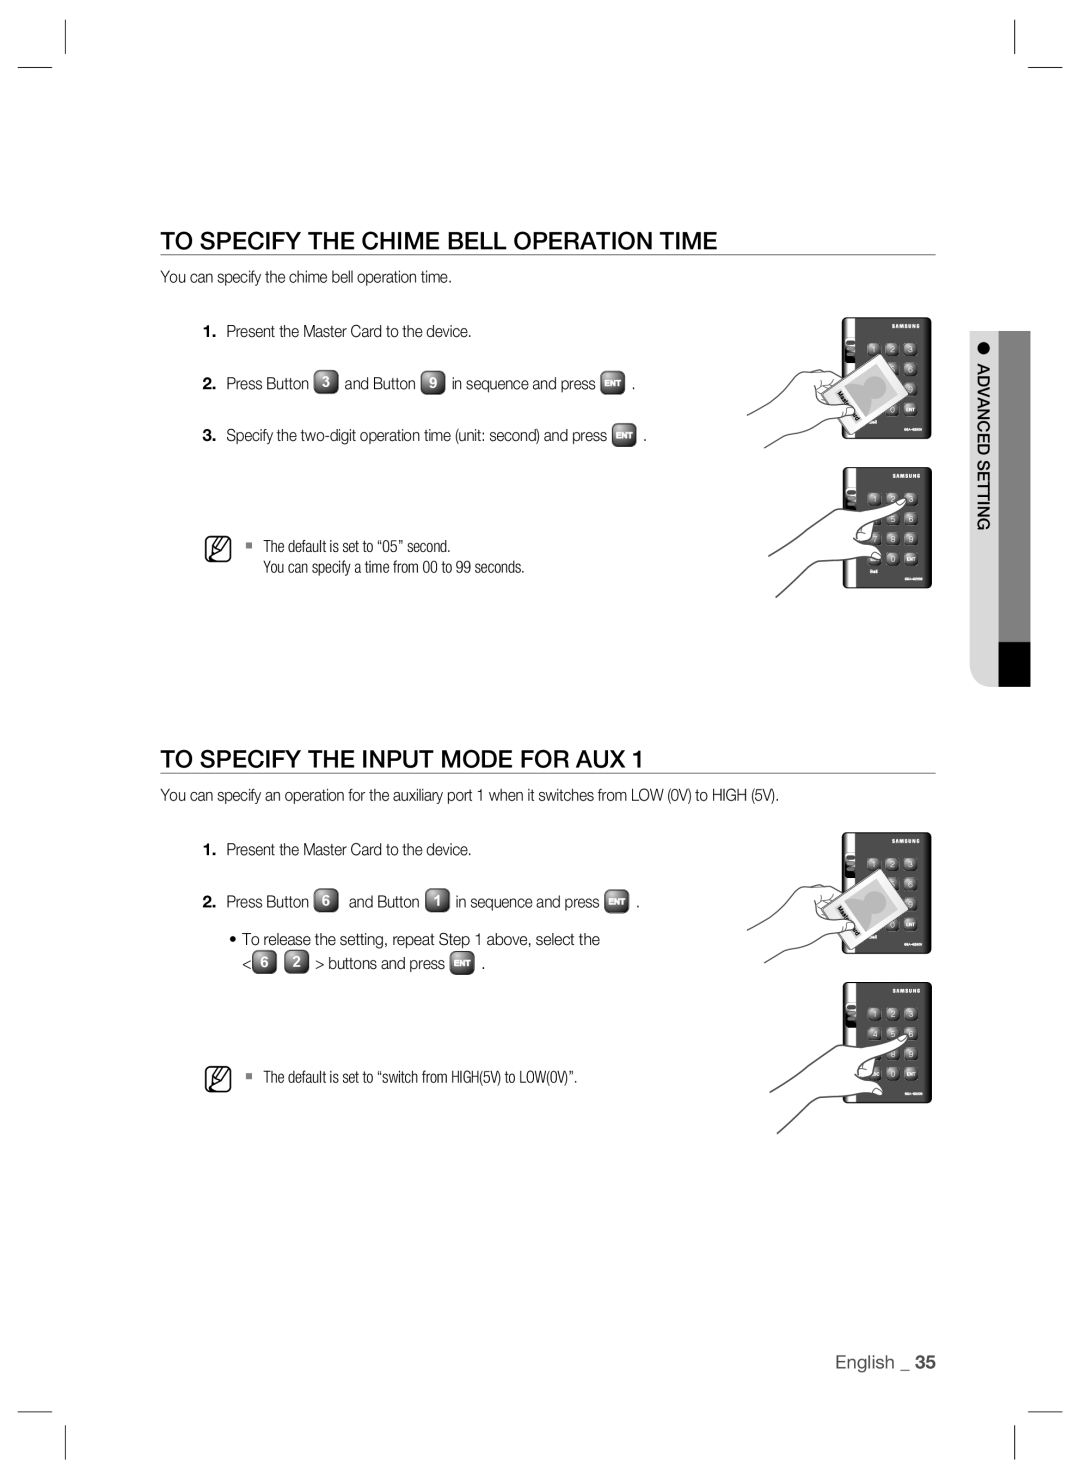 Samsung SSA-S2000W user manual To Specify The Chime Bell Operation Time, To Specify The Input Mode For Aux, English _ 